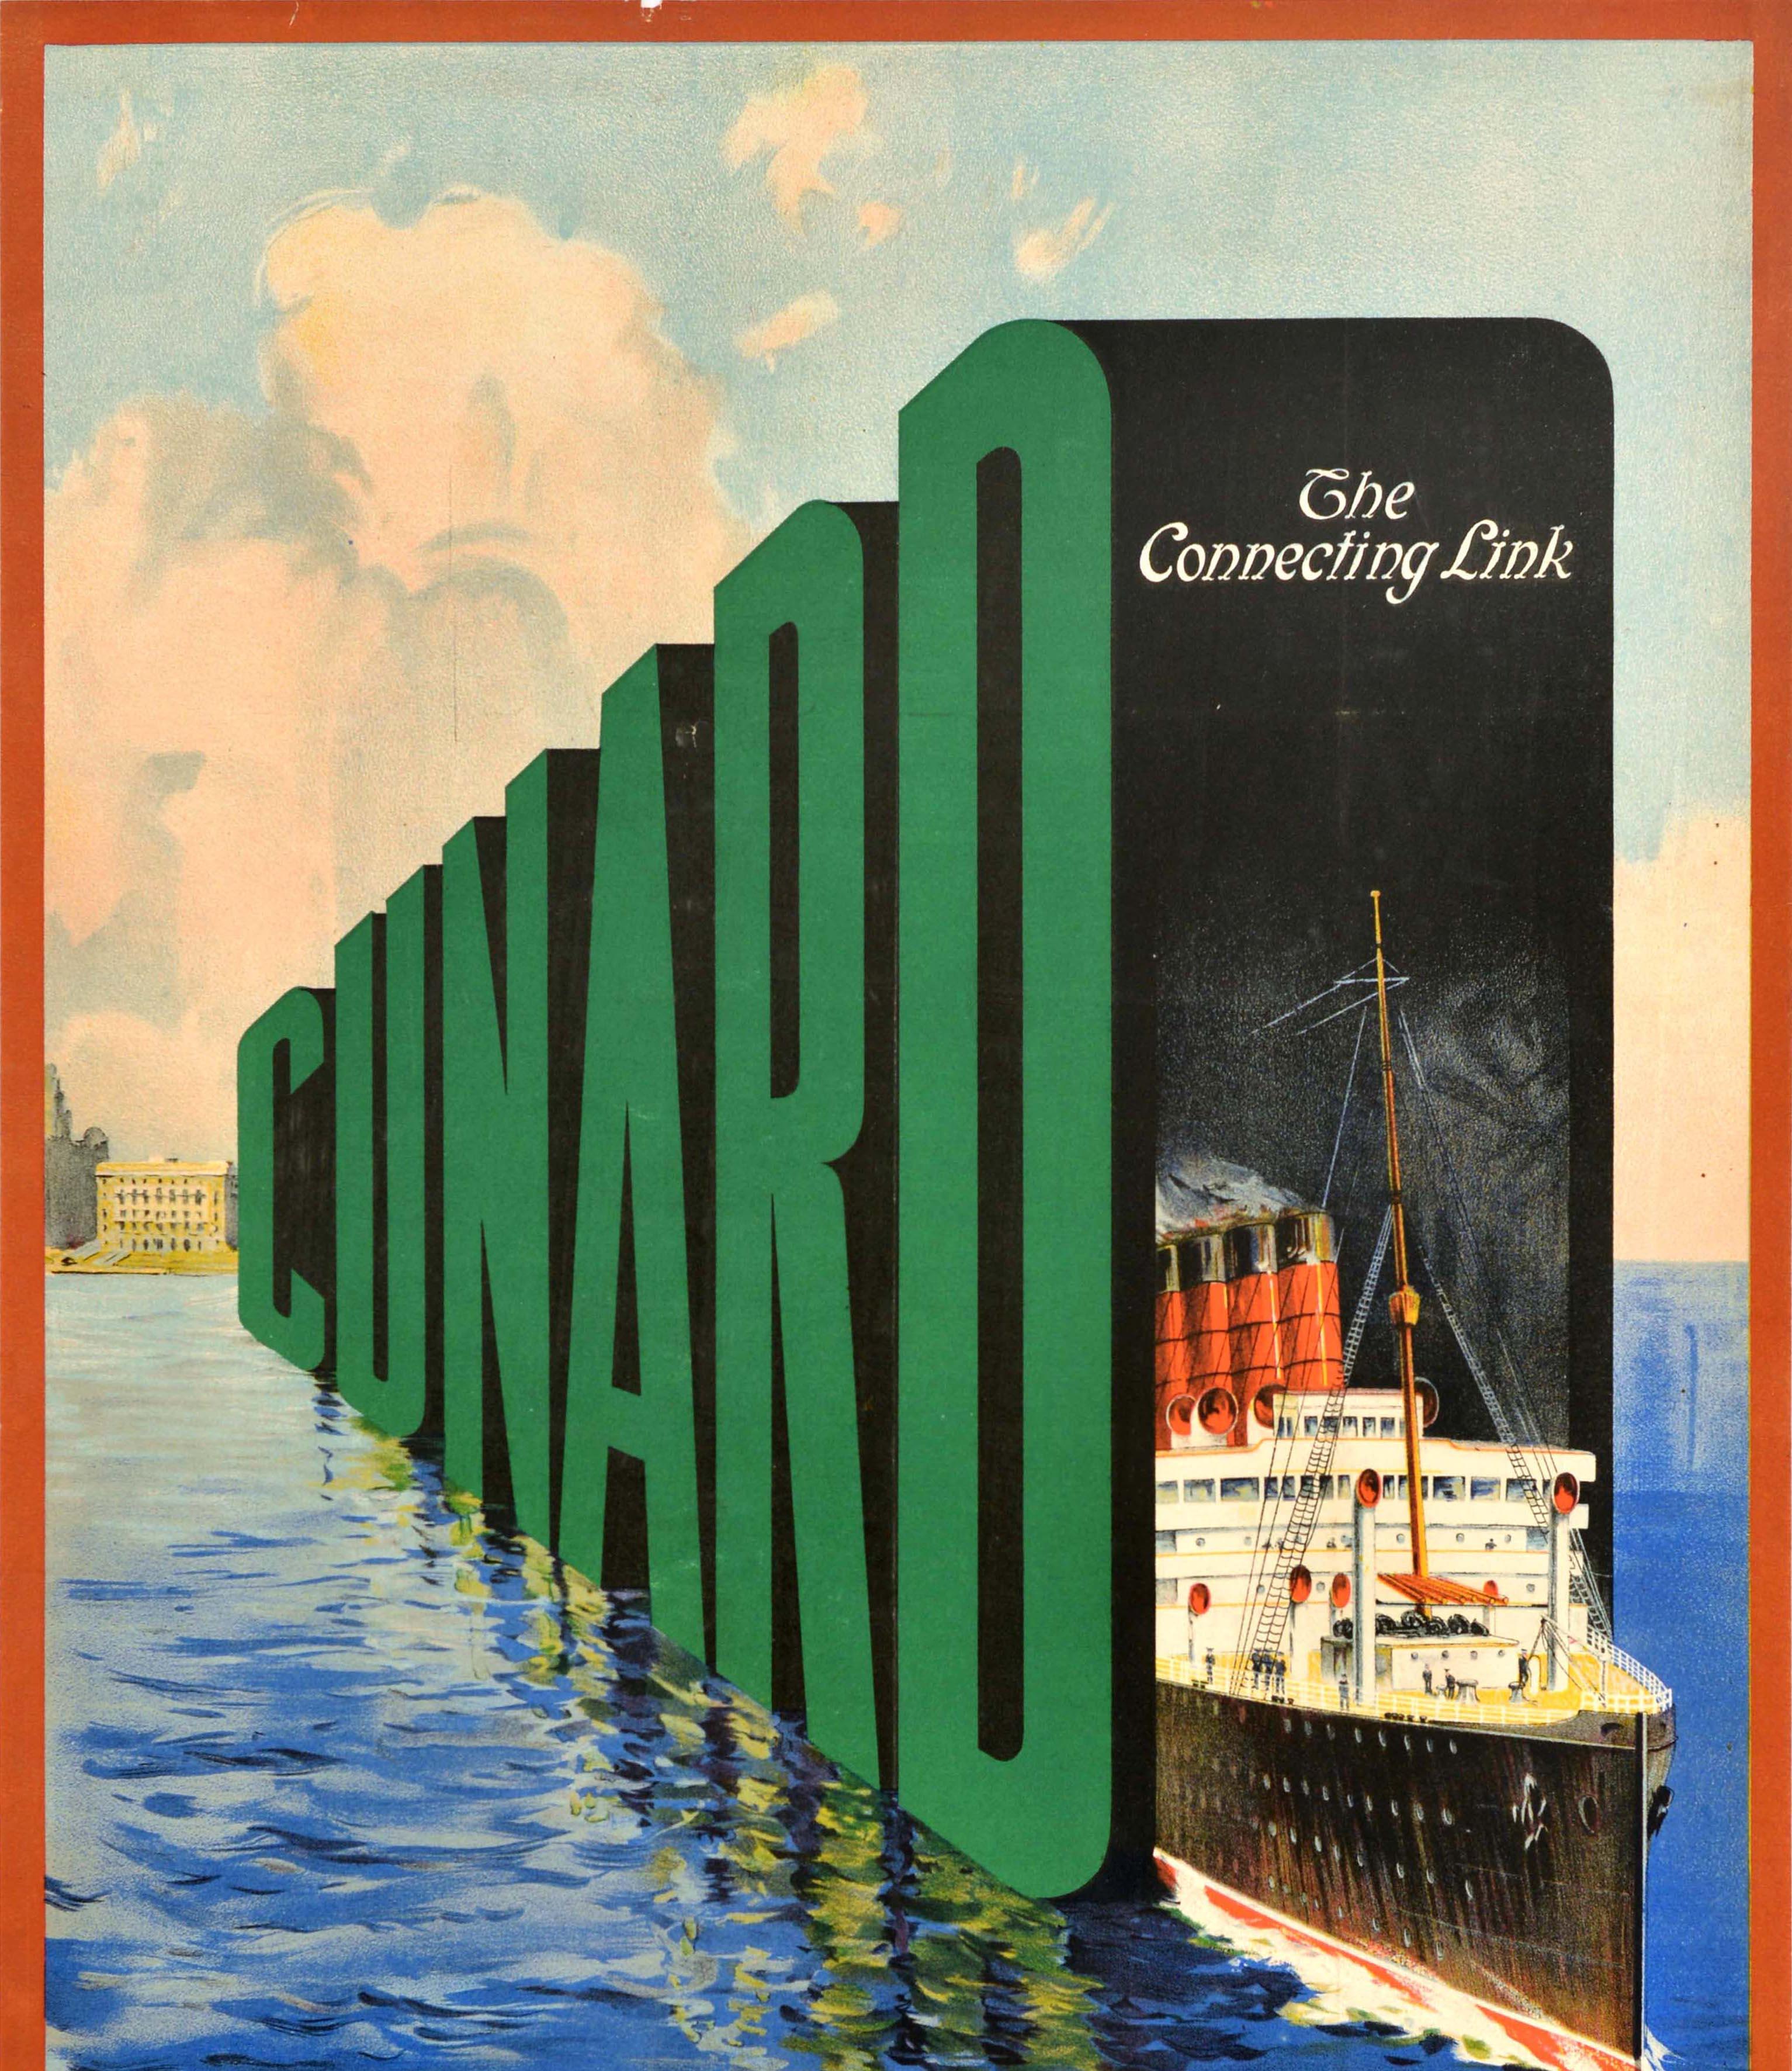 Original Vintage Cruise Travel Poster Cunard The Connecting Link Europe America - Black Print by Unknown